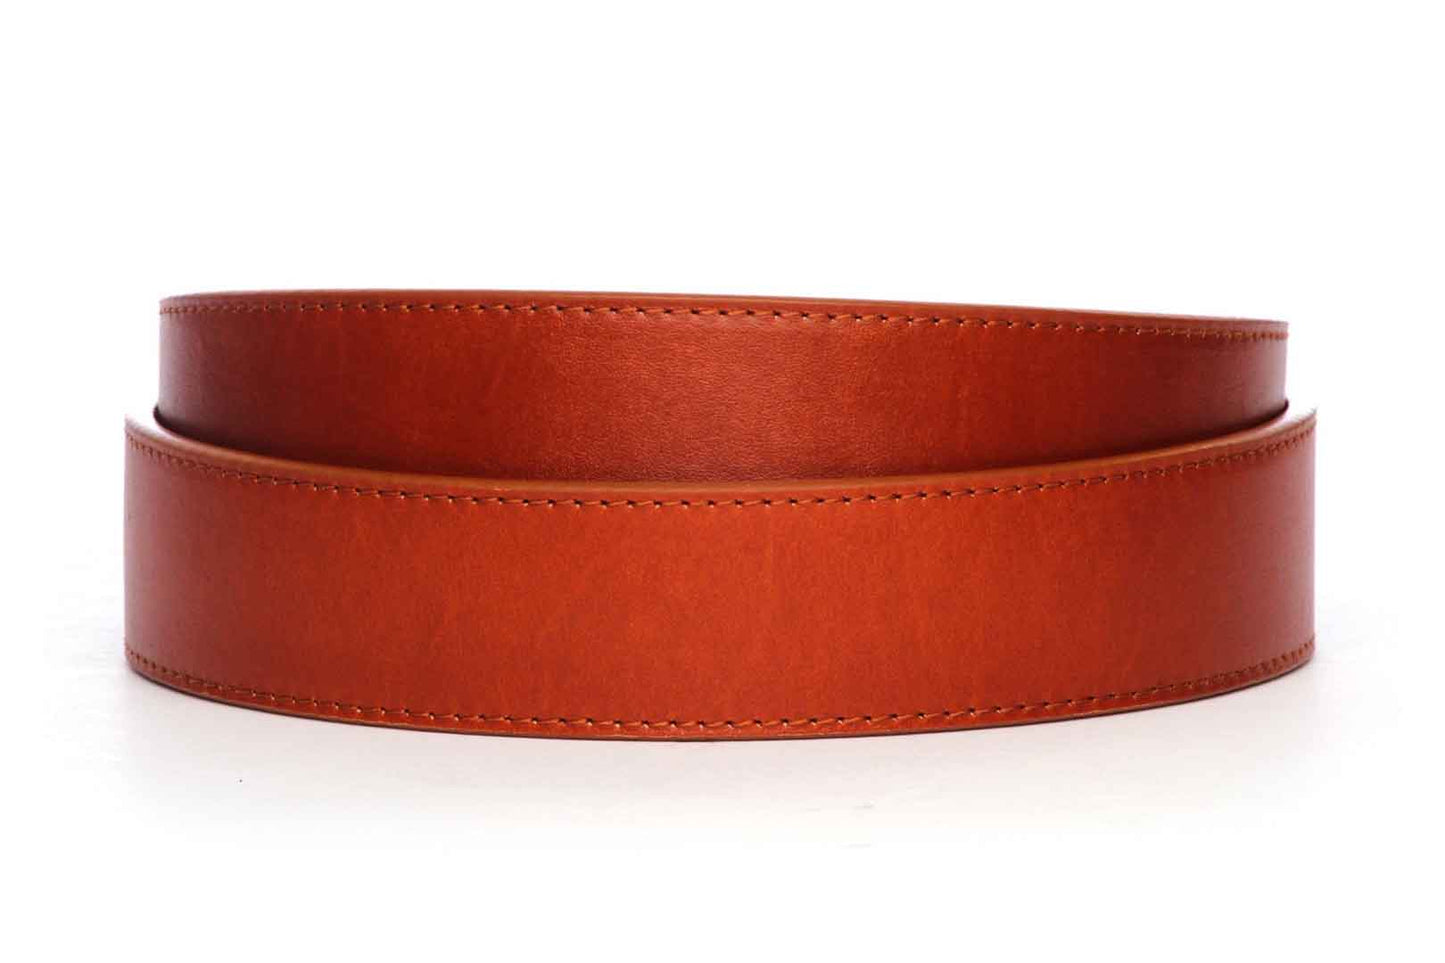 Men's leather belt strap in saddle tan vegetable tanned, 1.5 inches wide, formal look